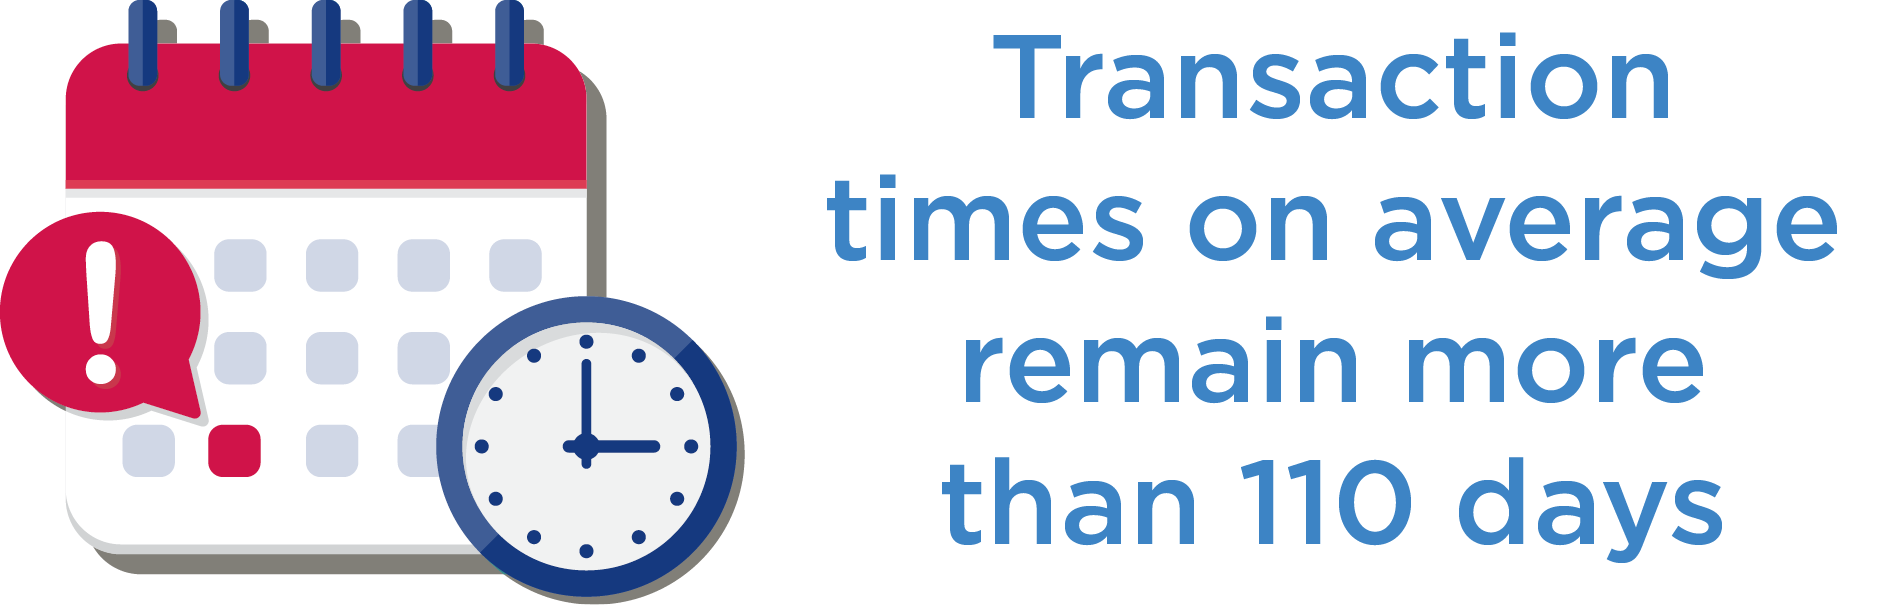 Transaction times on average remain more than 110 days